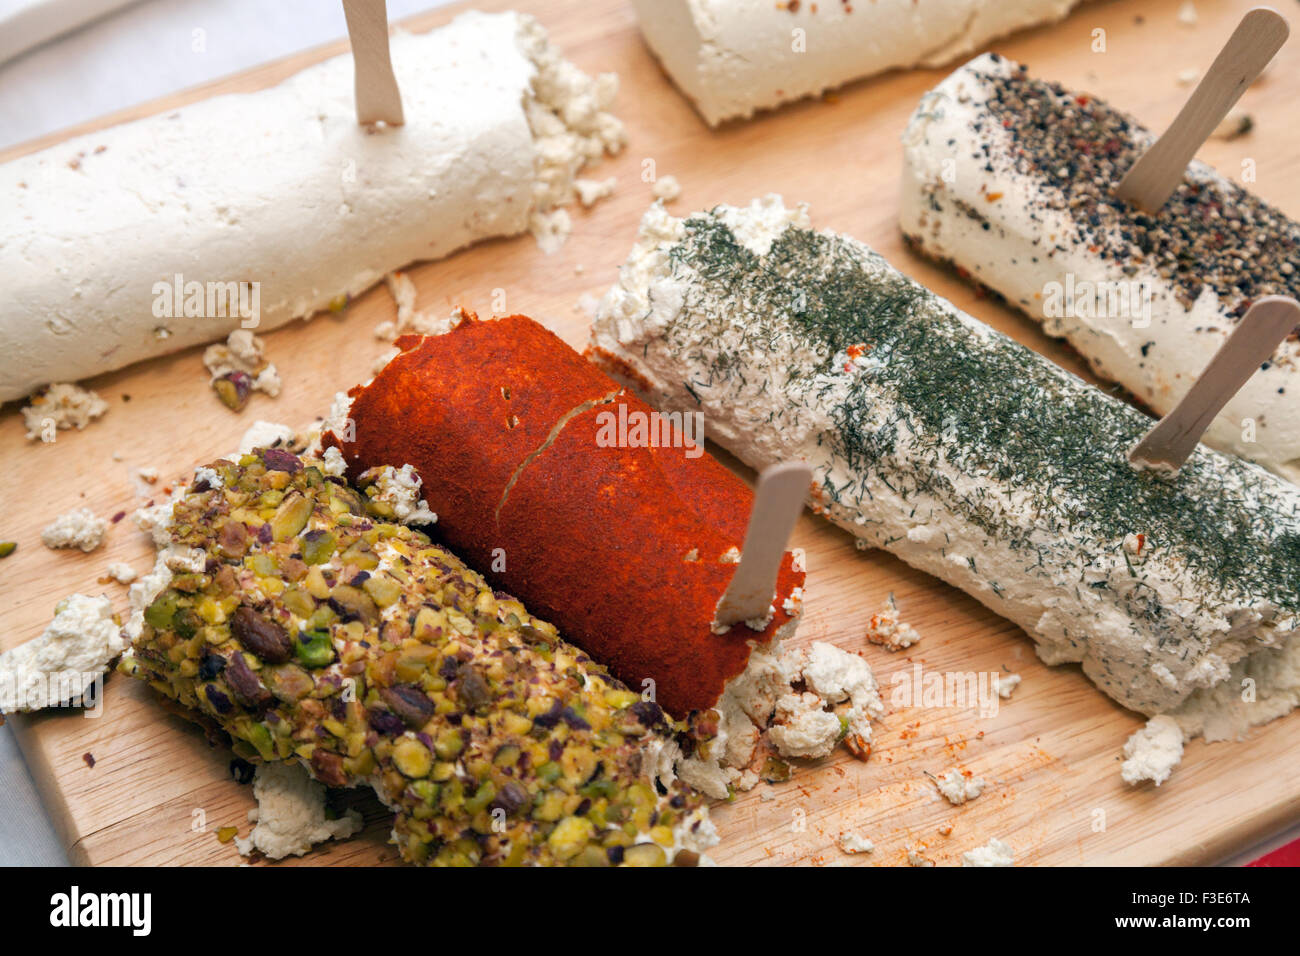 Cheese with spices on wooden surface Stock Photo